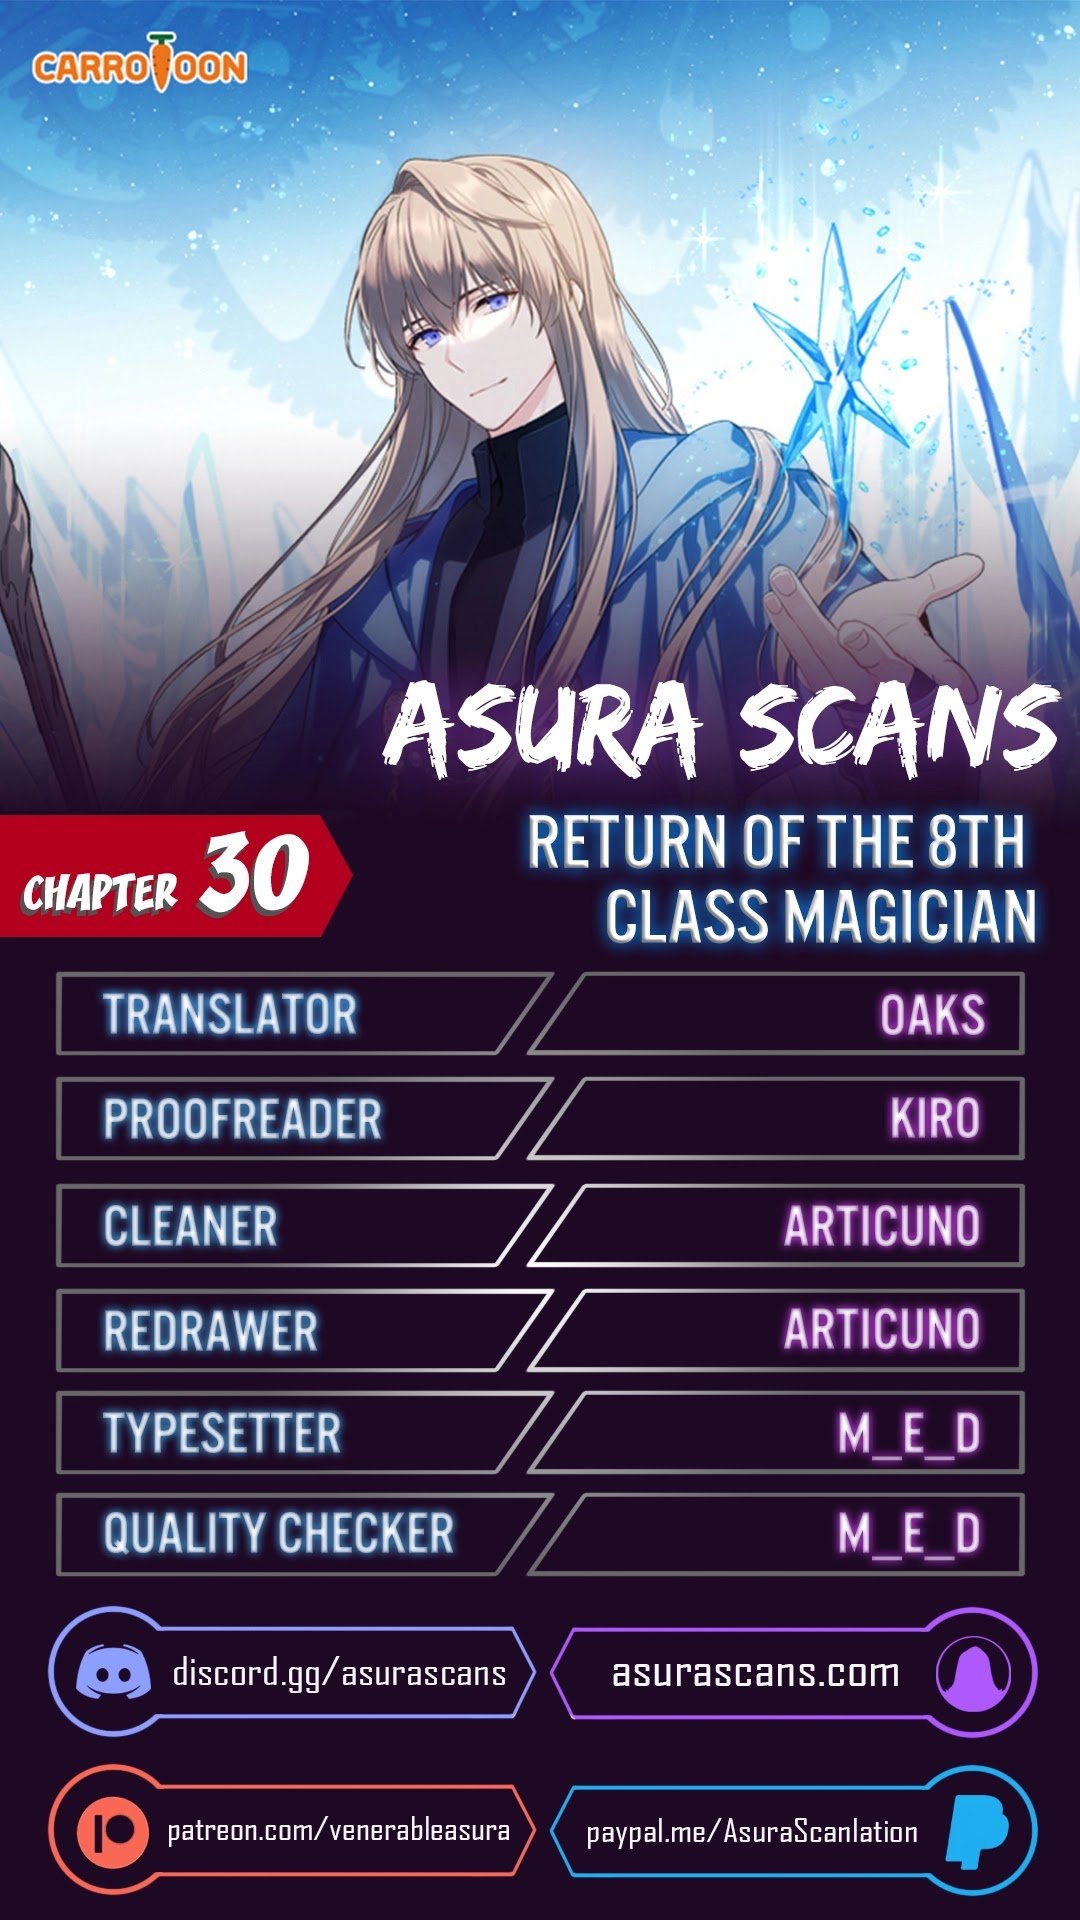 Return of the 8th class Magician chapter 30